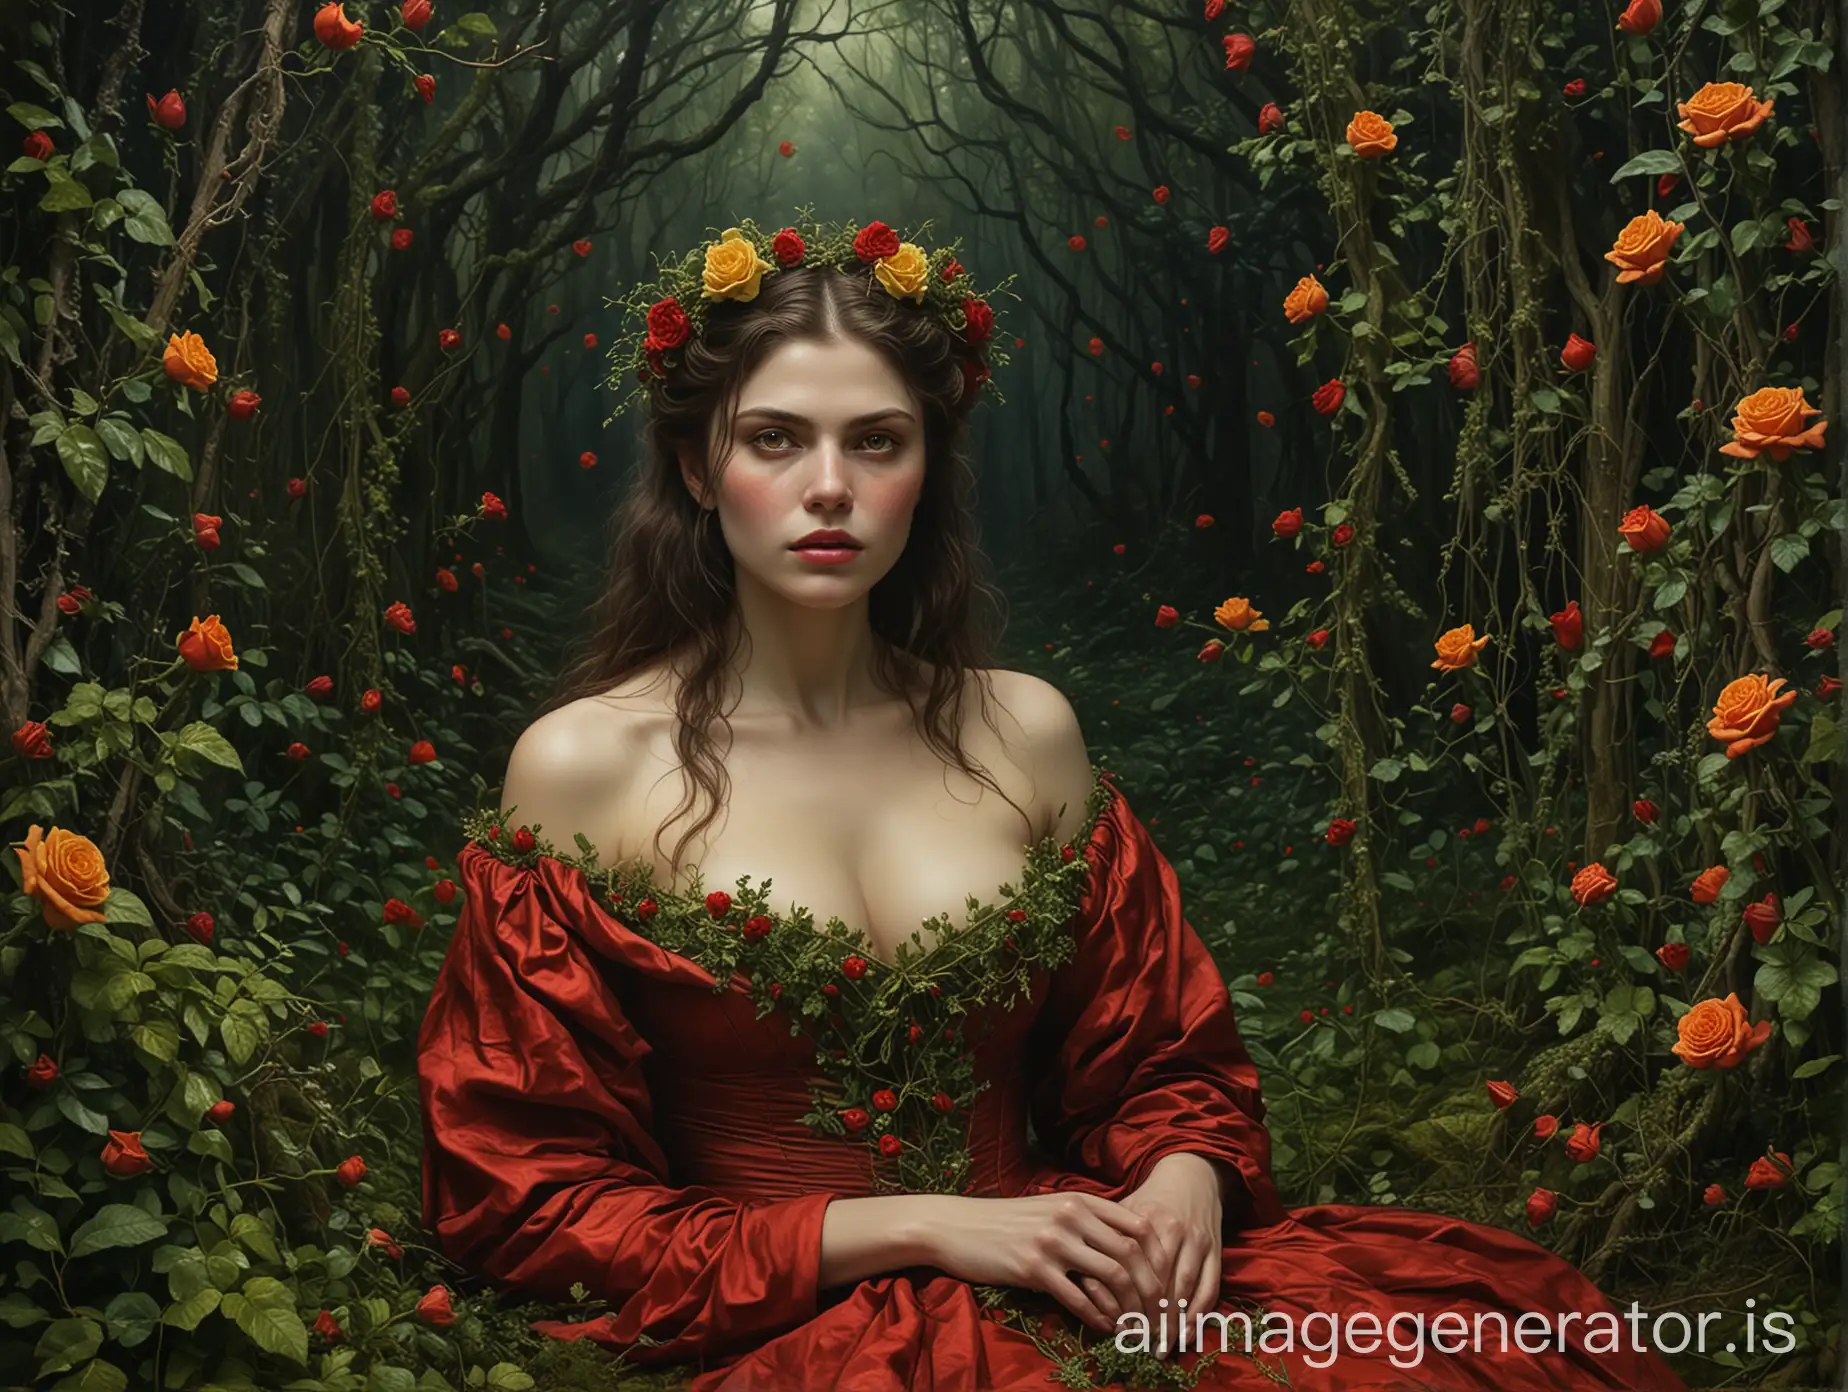 Surrealistic-Oil-Painting-of-a-Woman-Enshrouded-in-Emerald-Vines-and-Red-Roses